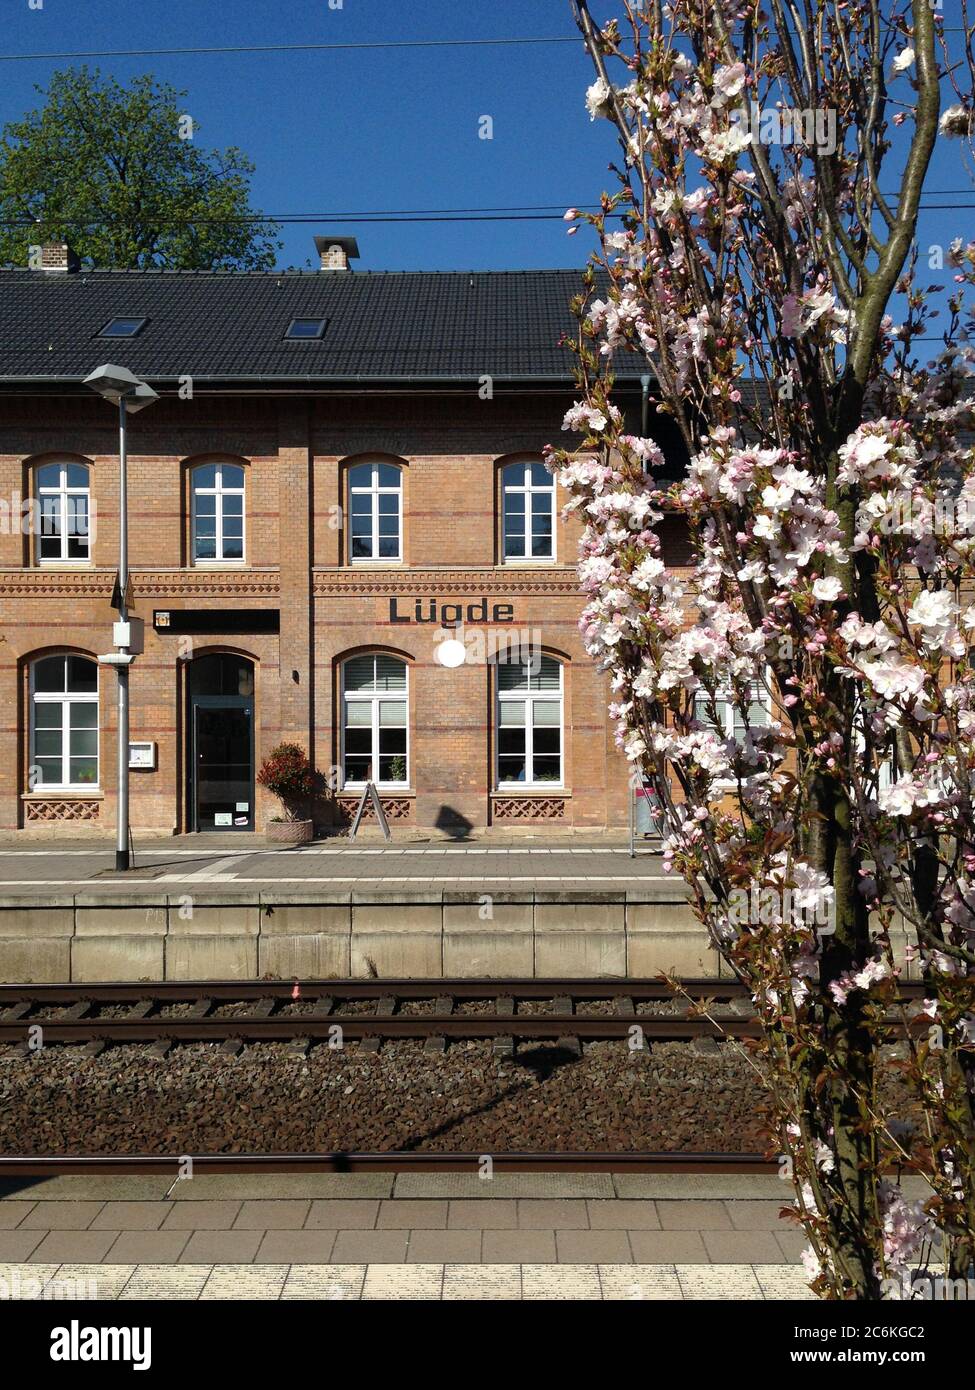 Train station in small town Luegde, Germany in spring. Stock Photo